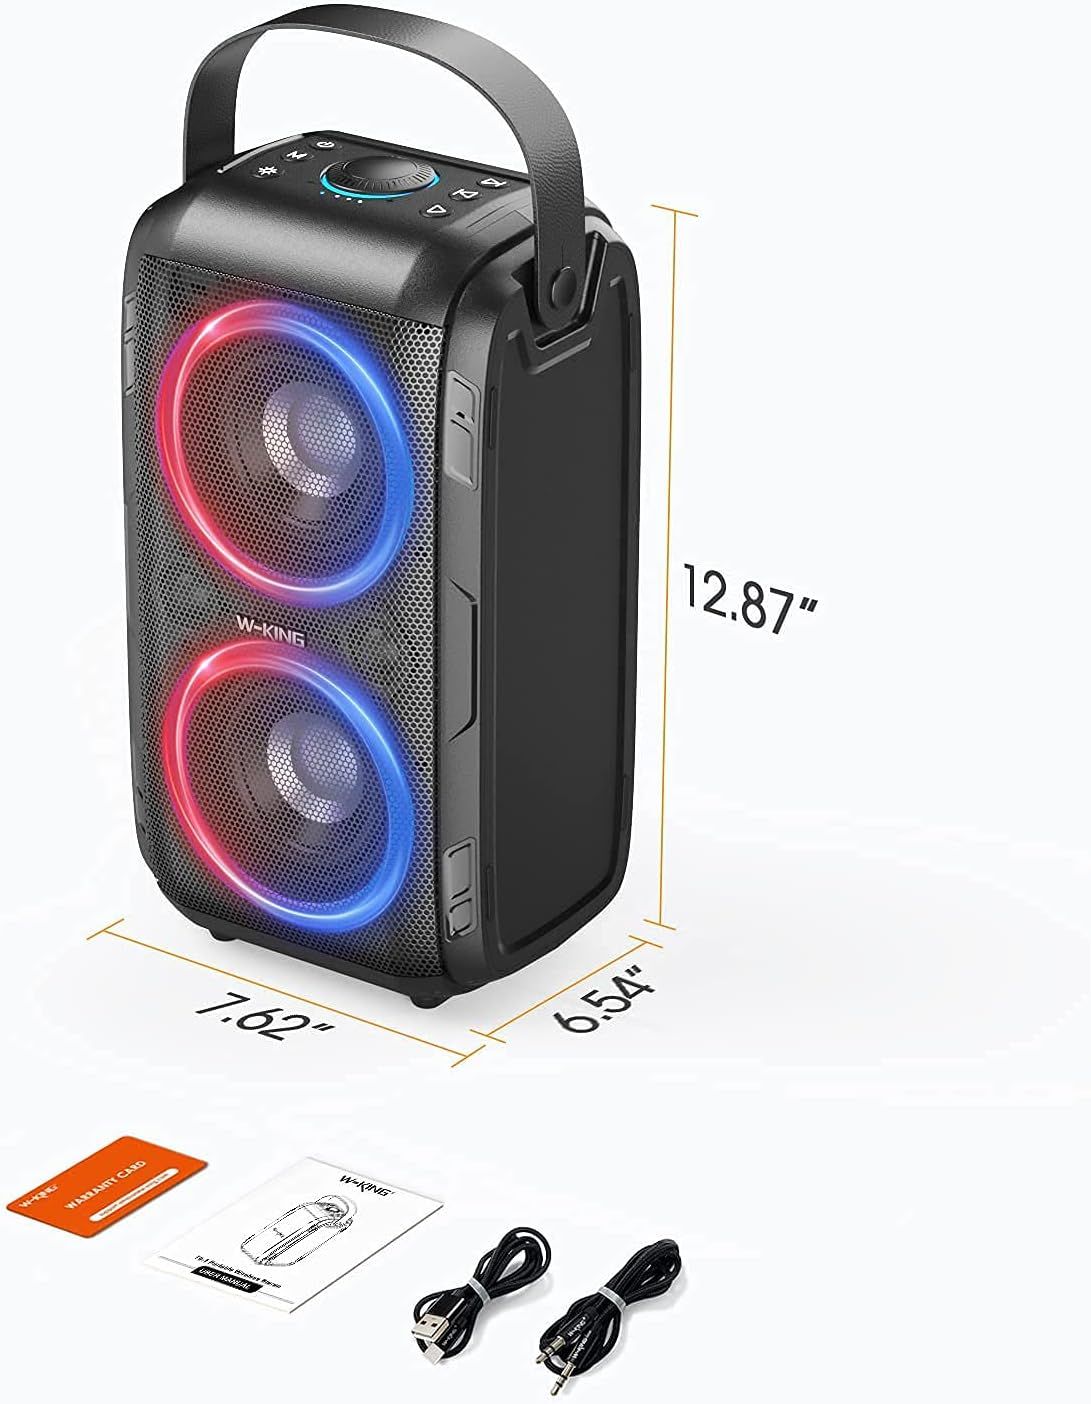 W-KING 80W Bluetooth Speakers Loud, Super Rich Bass, Huge 105dB Sound  Powerful Portable Wireless Outdoor Bluetooth Speaker, Mixed Color Lights,  24H